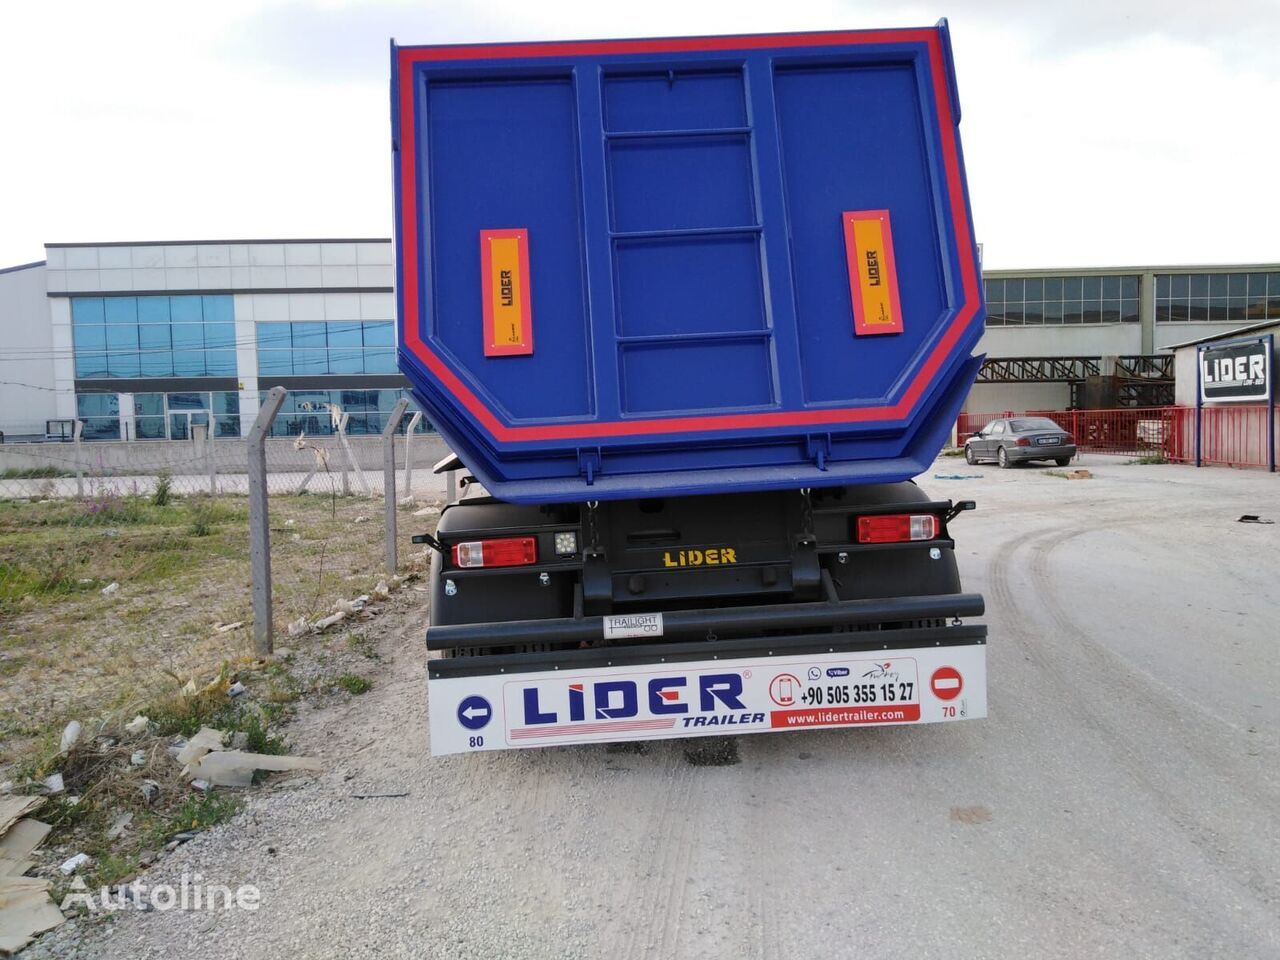 Лизинг на LIDER 2022 NEW READY IN STOCKS DIRECTLY FROM MANUFACTURER COMPANY LIDER 2022 NEW READY IN STOCKS DIRECTLY FROM MANUFACTURER COMPANY: слика 17